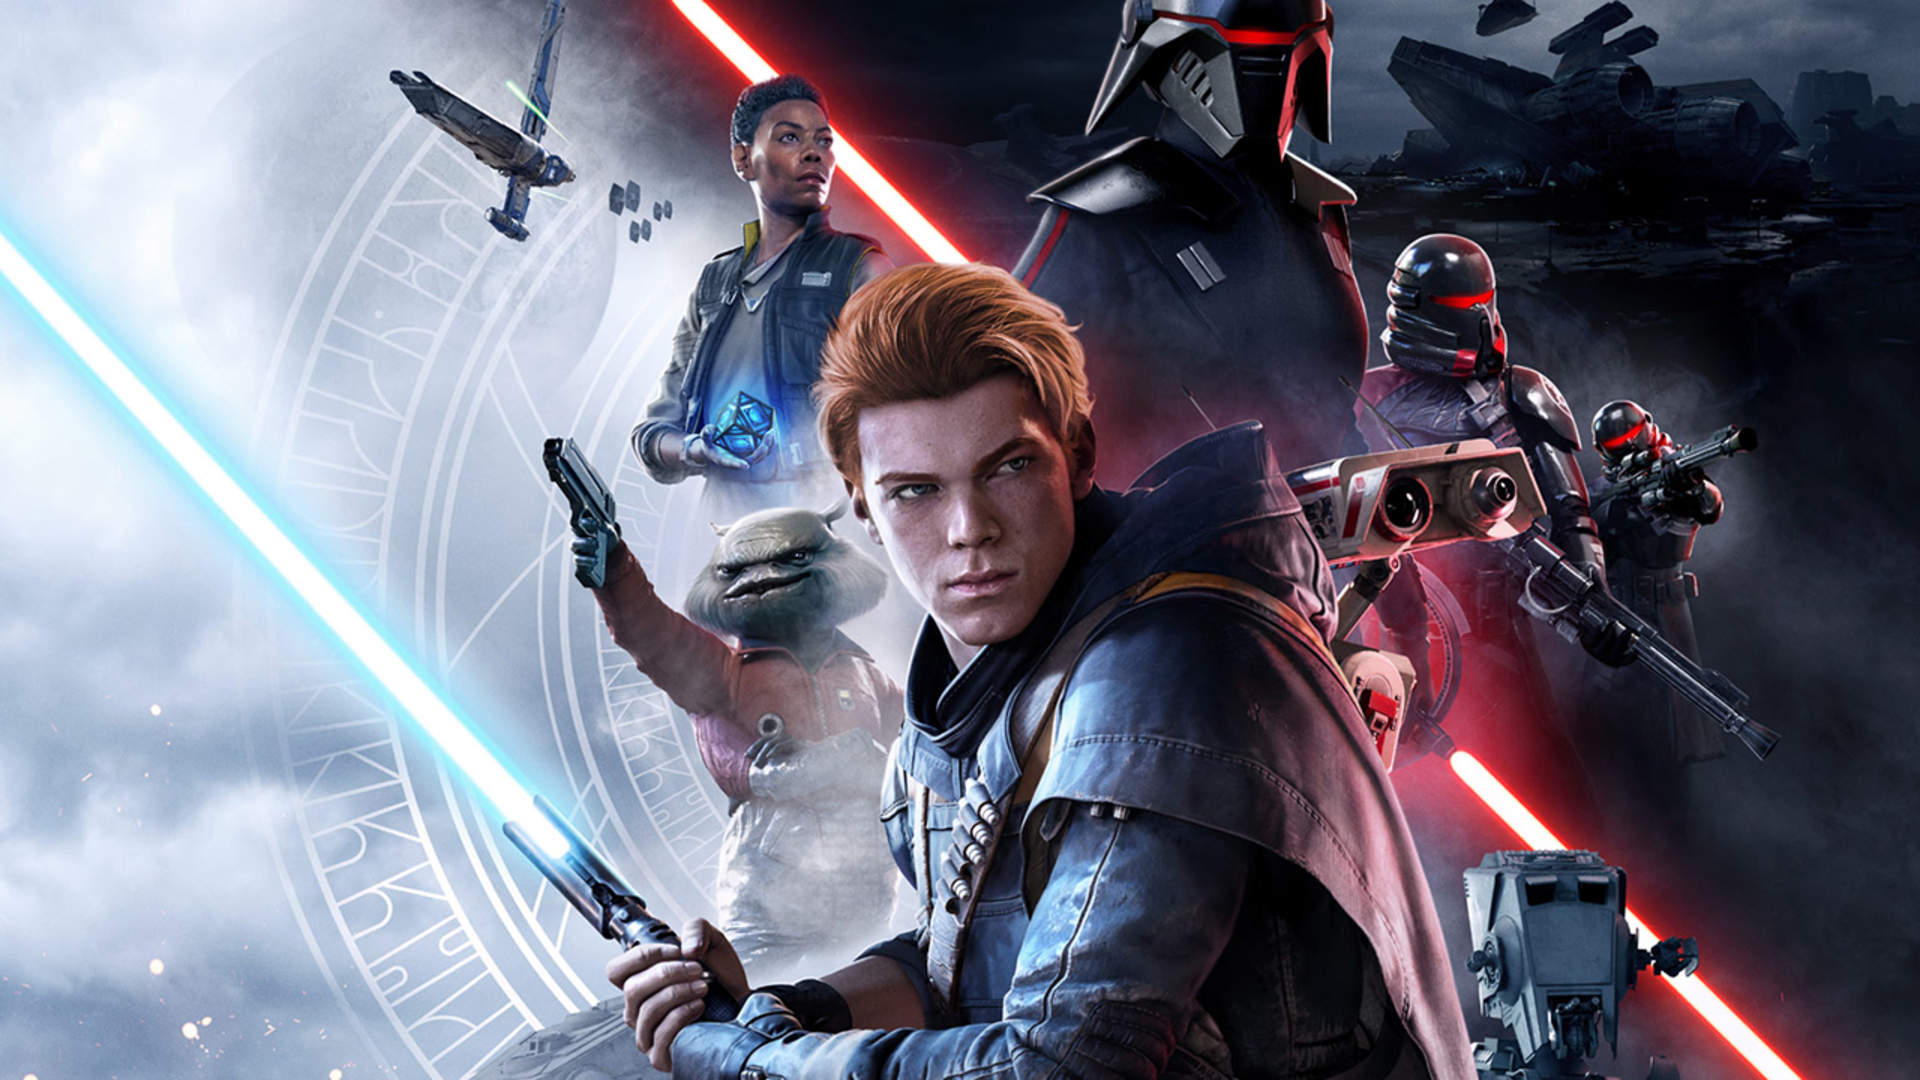 games that deserve movies and shows - STAR WARS JEDI: FALLEN ORDER